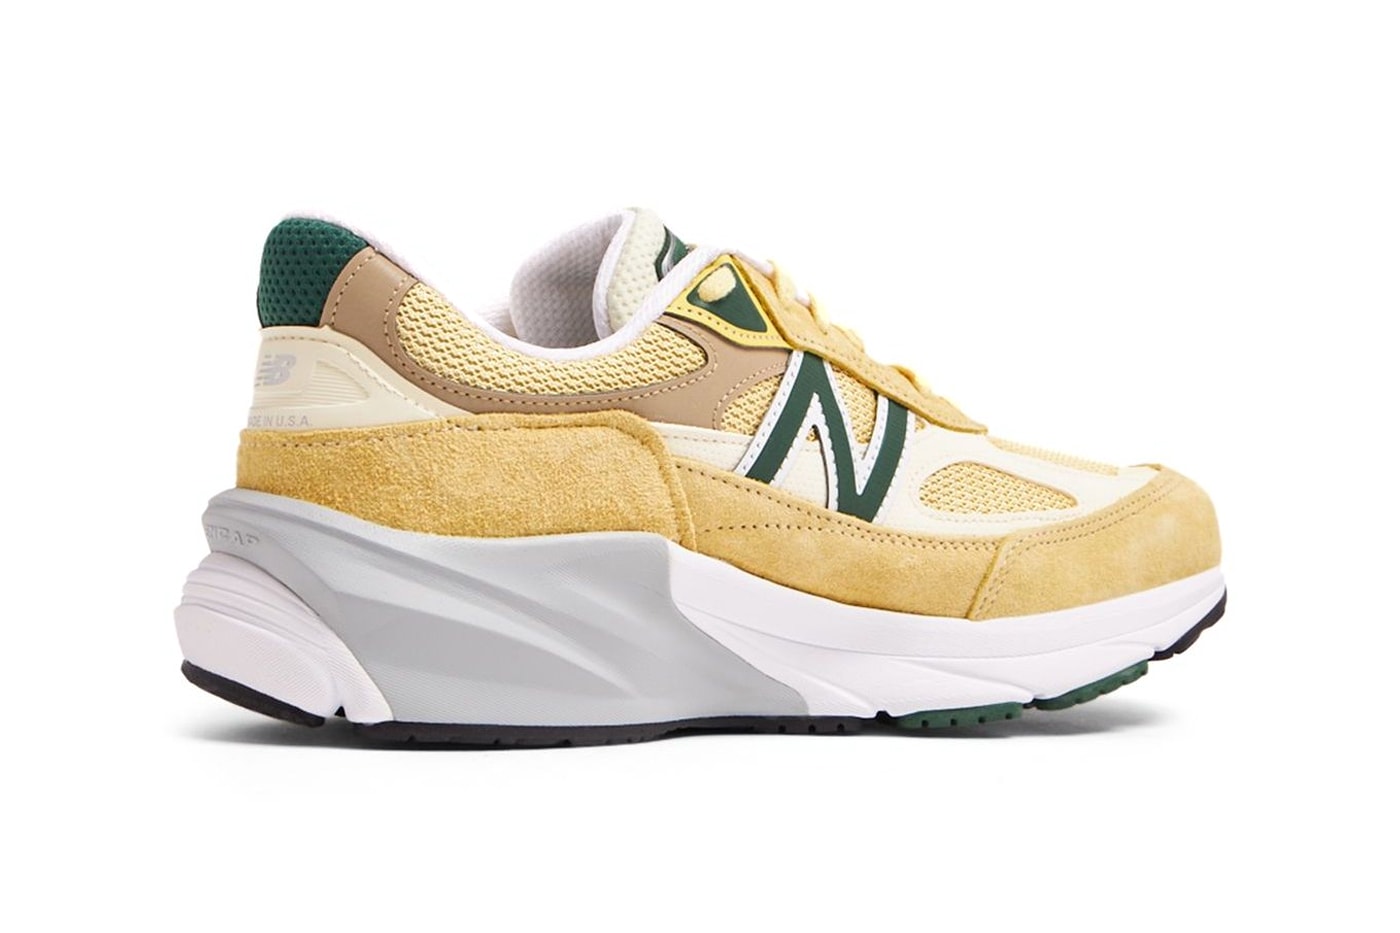 New Balance 990V6 Made in USA Arrives in "Pale Yellow" U990TE6 Pale Yellow/Forest Green everyday sneaker